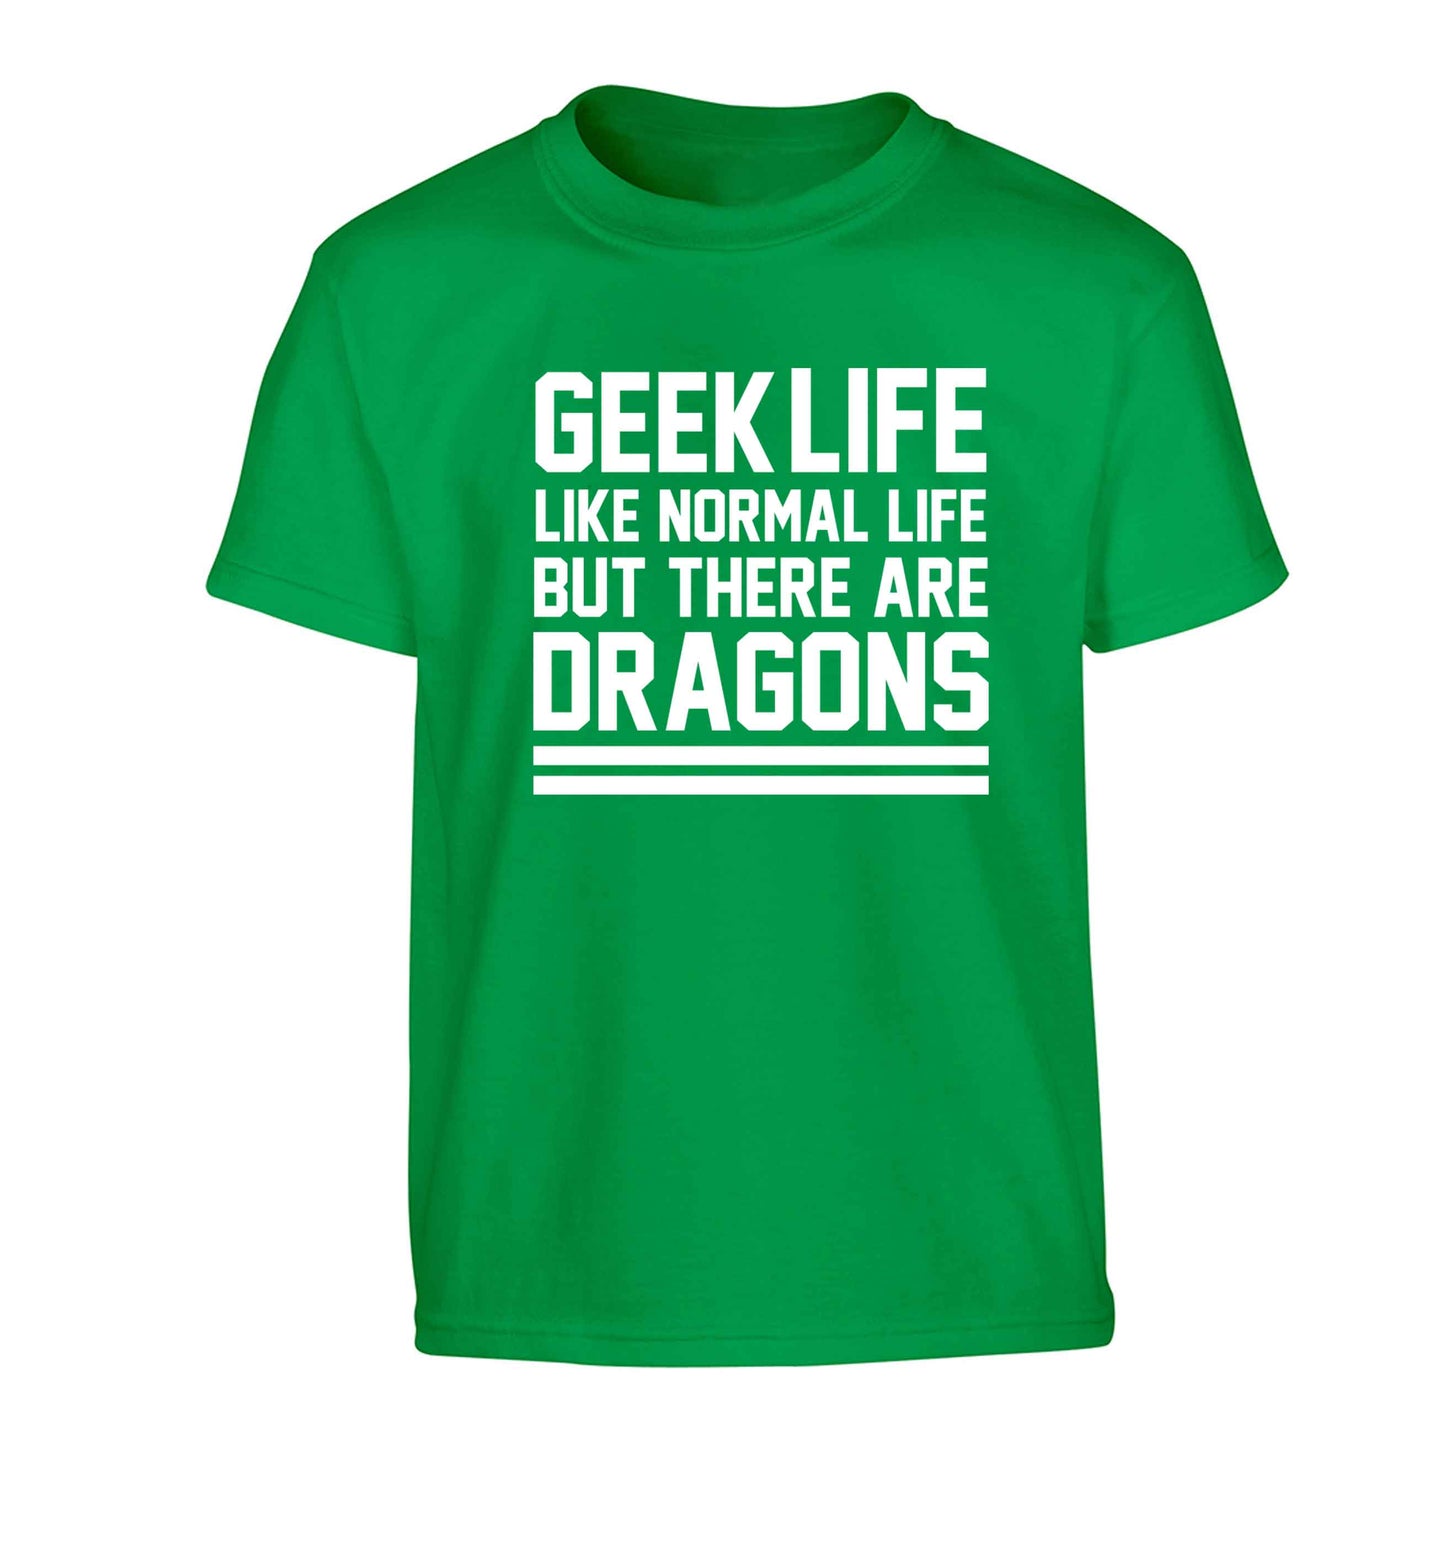 Geek life like normal life but there are dragons Children's green Tshirt 12-13 Years